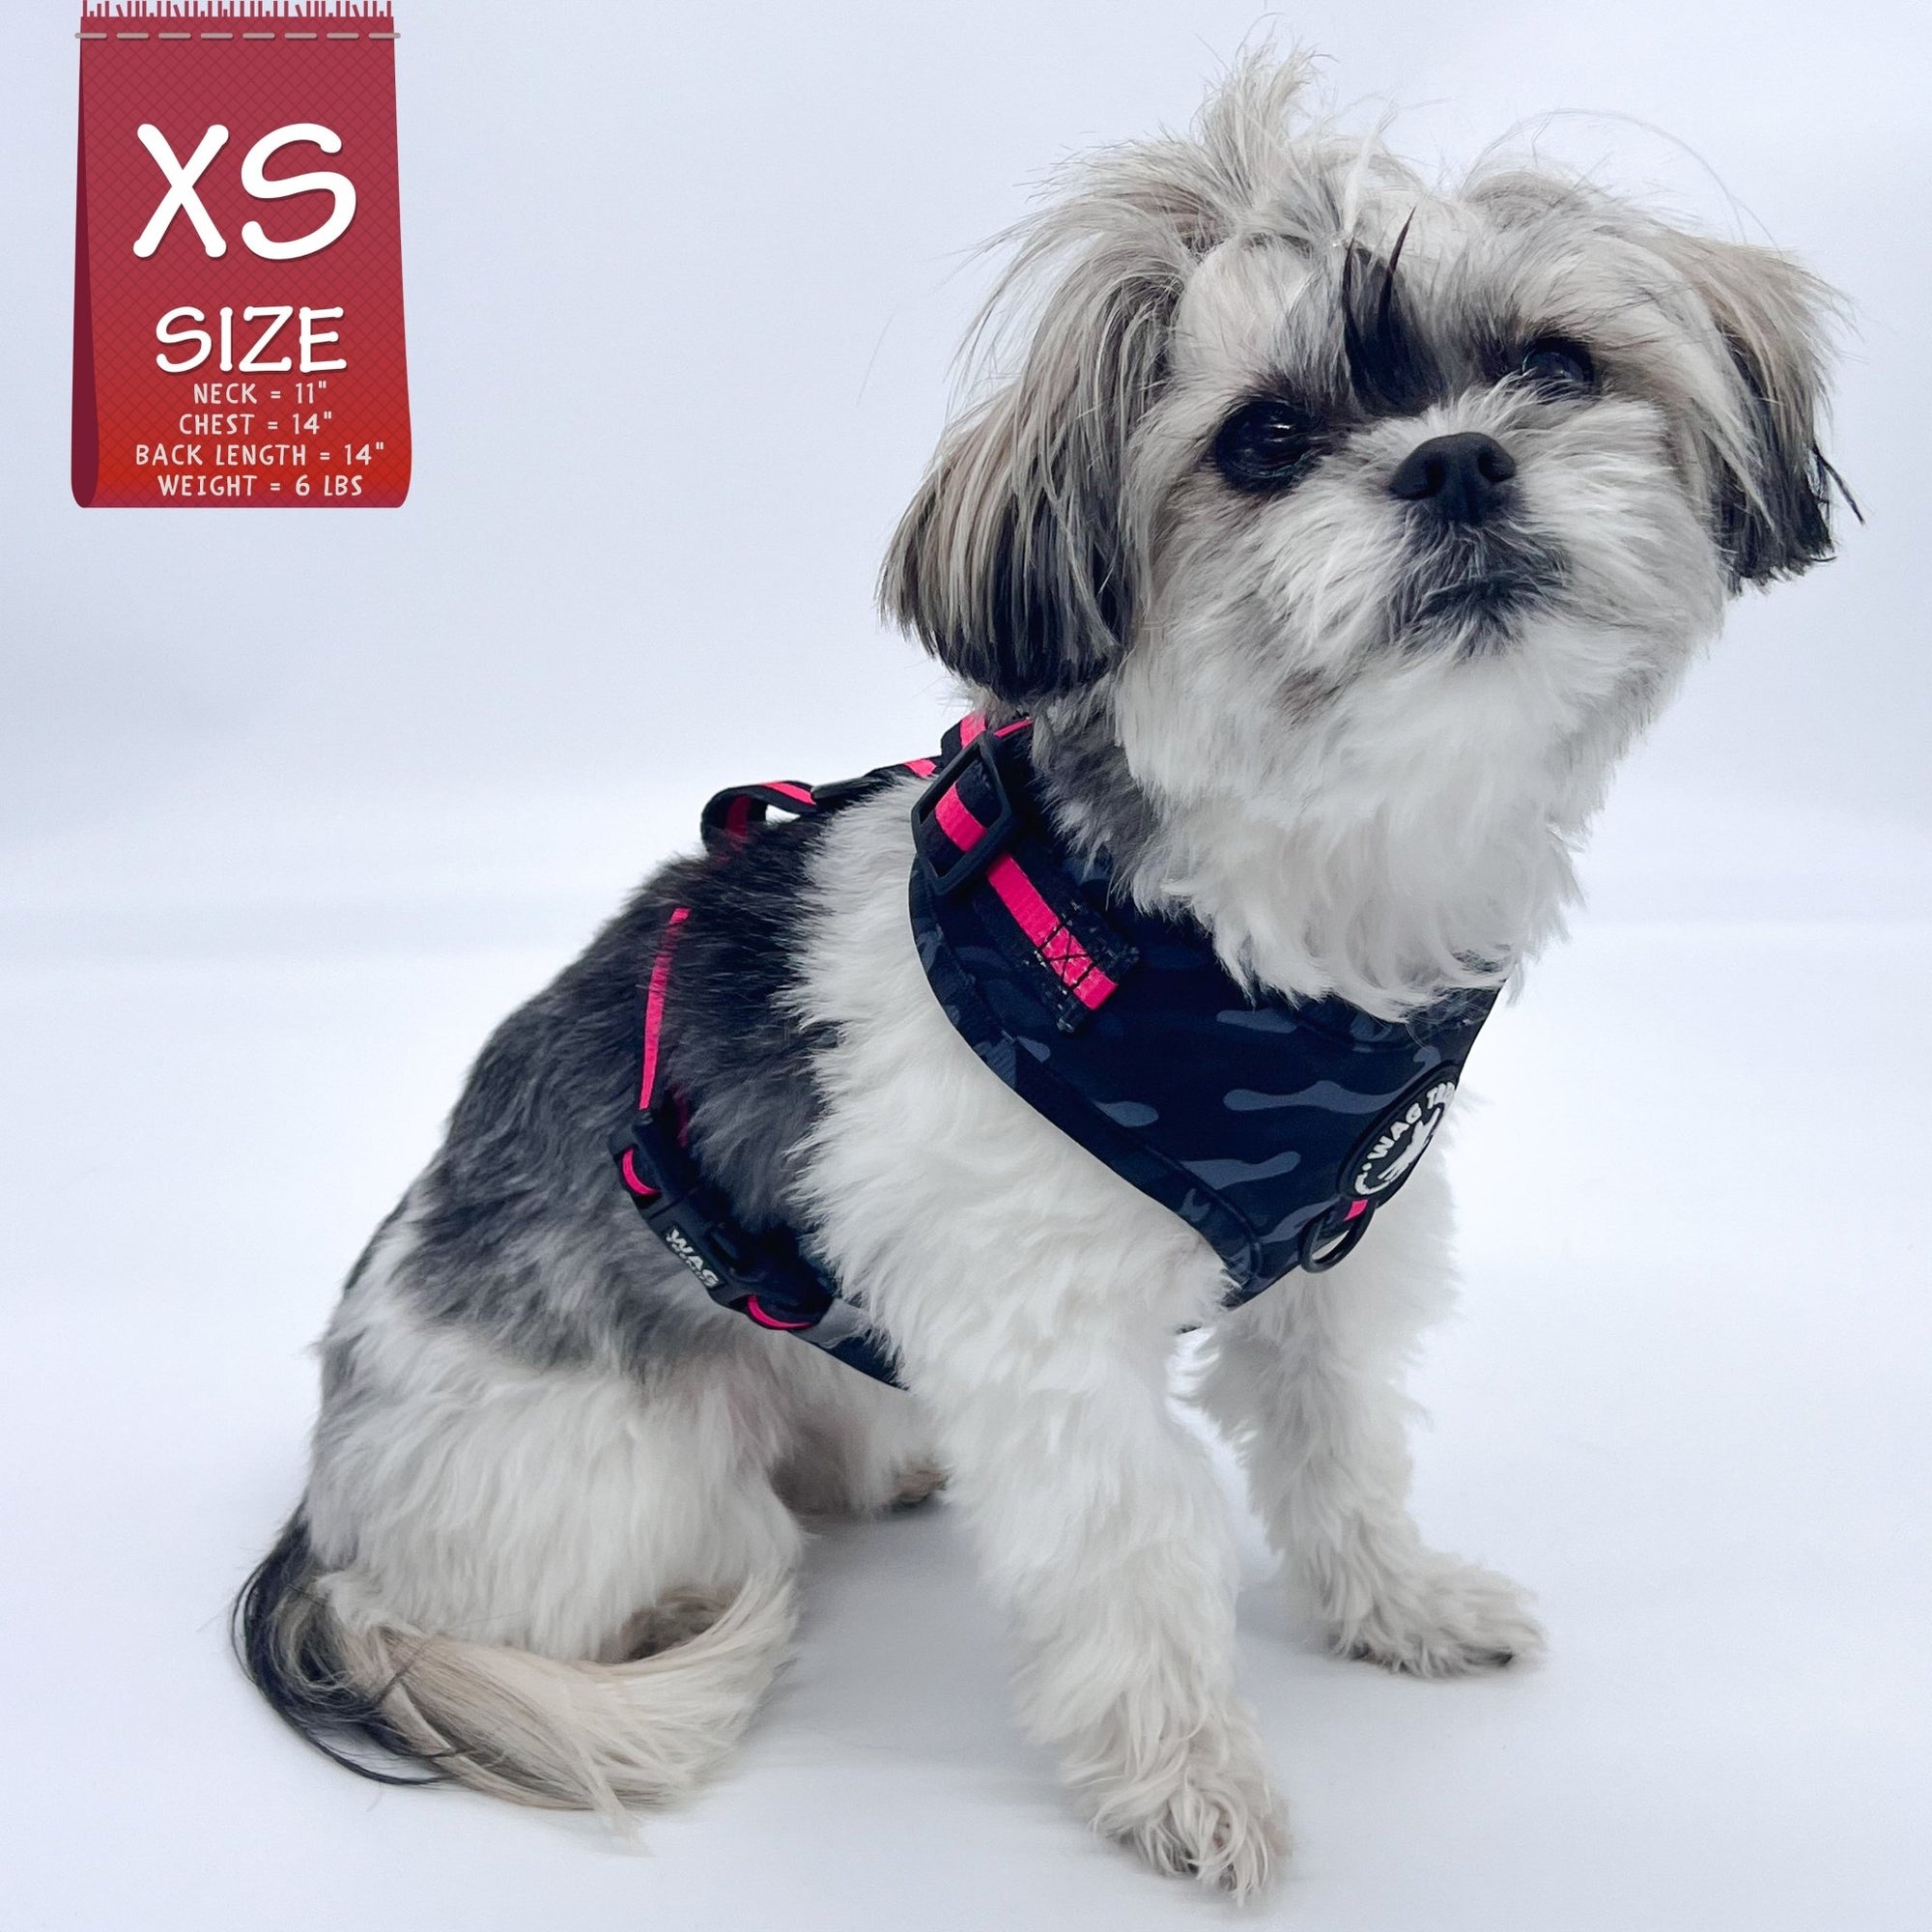 Dog Collar Harness and Leash Set - Shih Tzu mix wearing XS Dog Adjustable Harness in black &amp; gray camo with hot pink accents - against solid white background - Wag Trendz